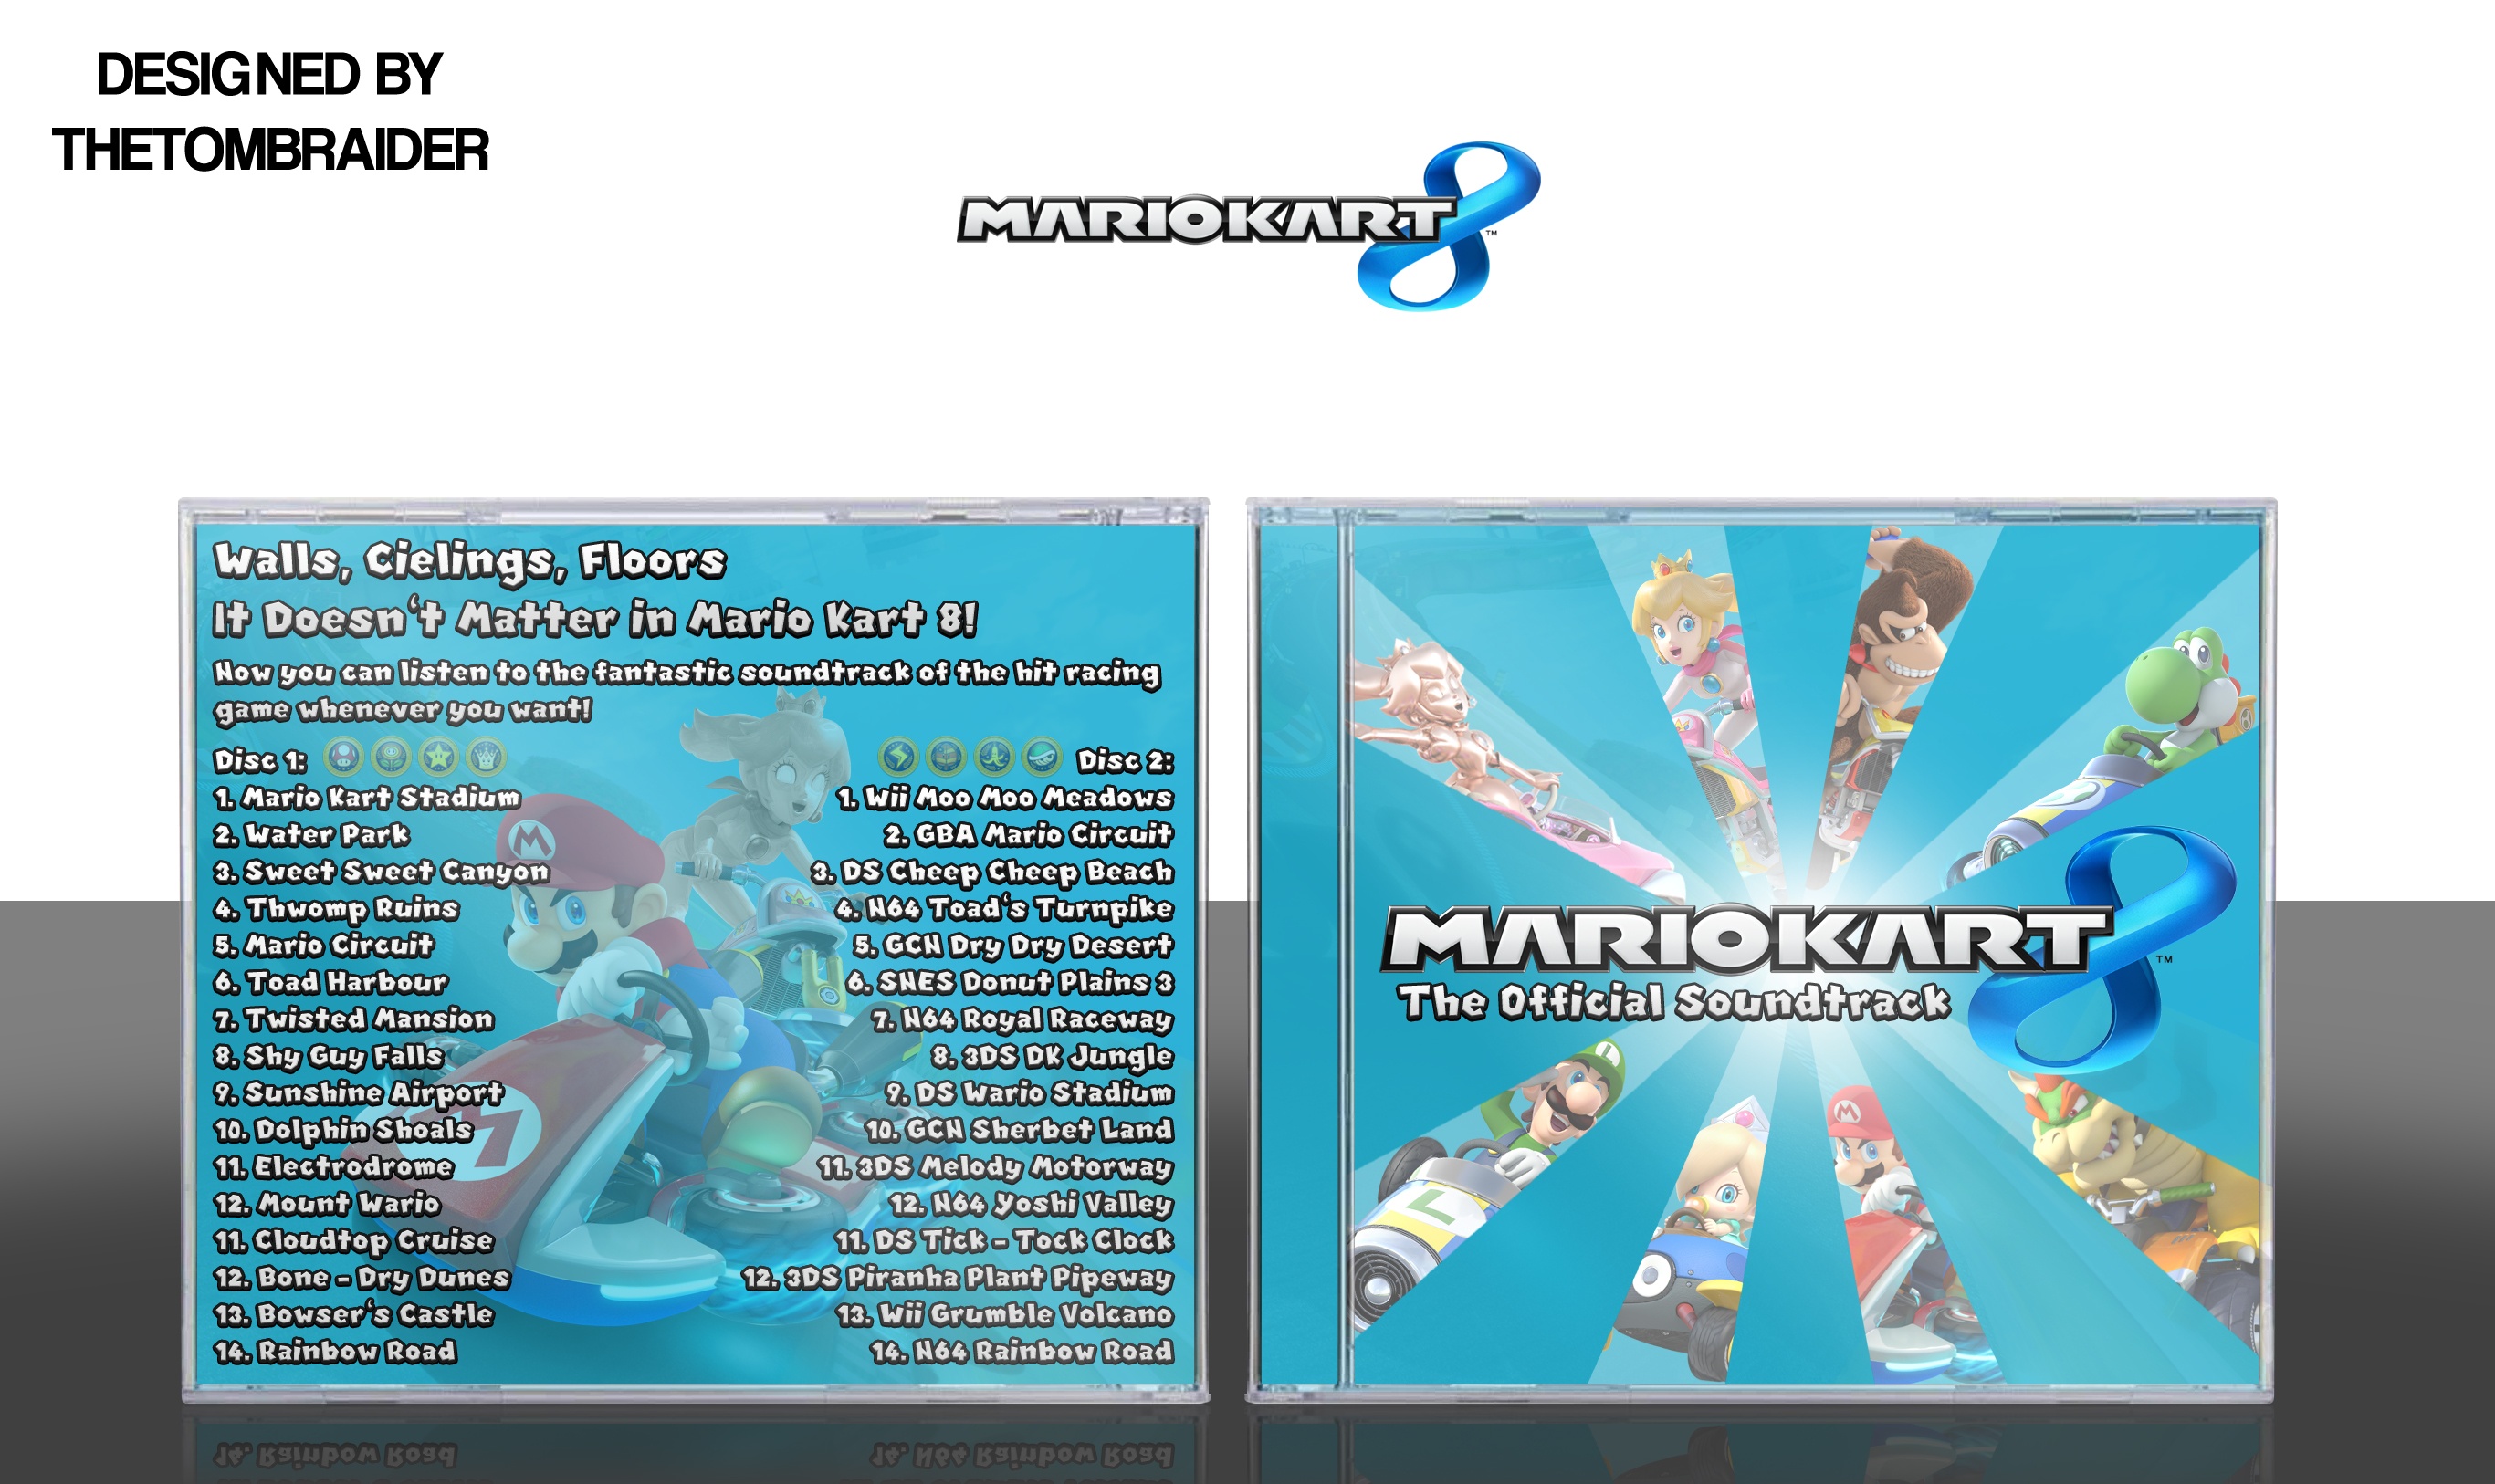 Mario Kart 8 - The Official Soundtrack box cover